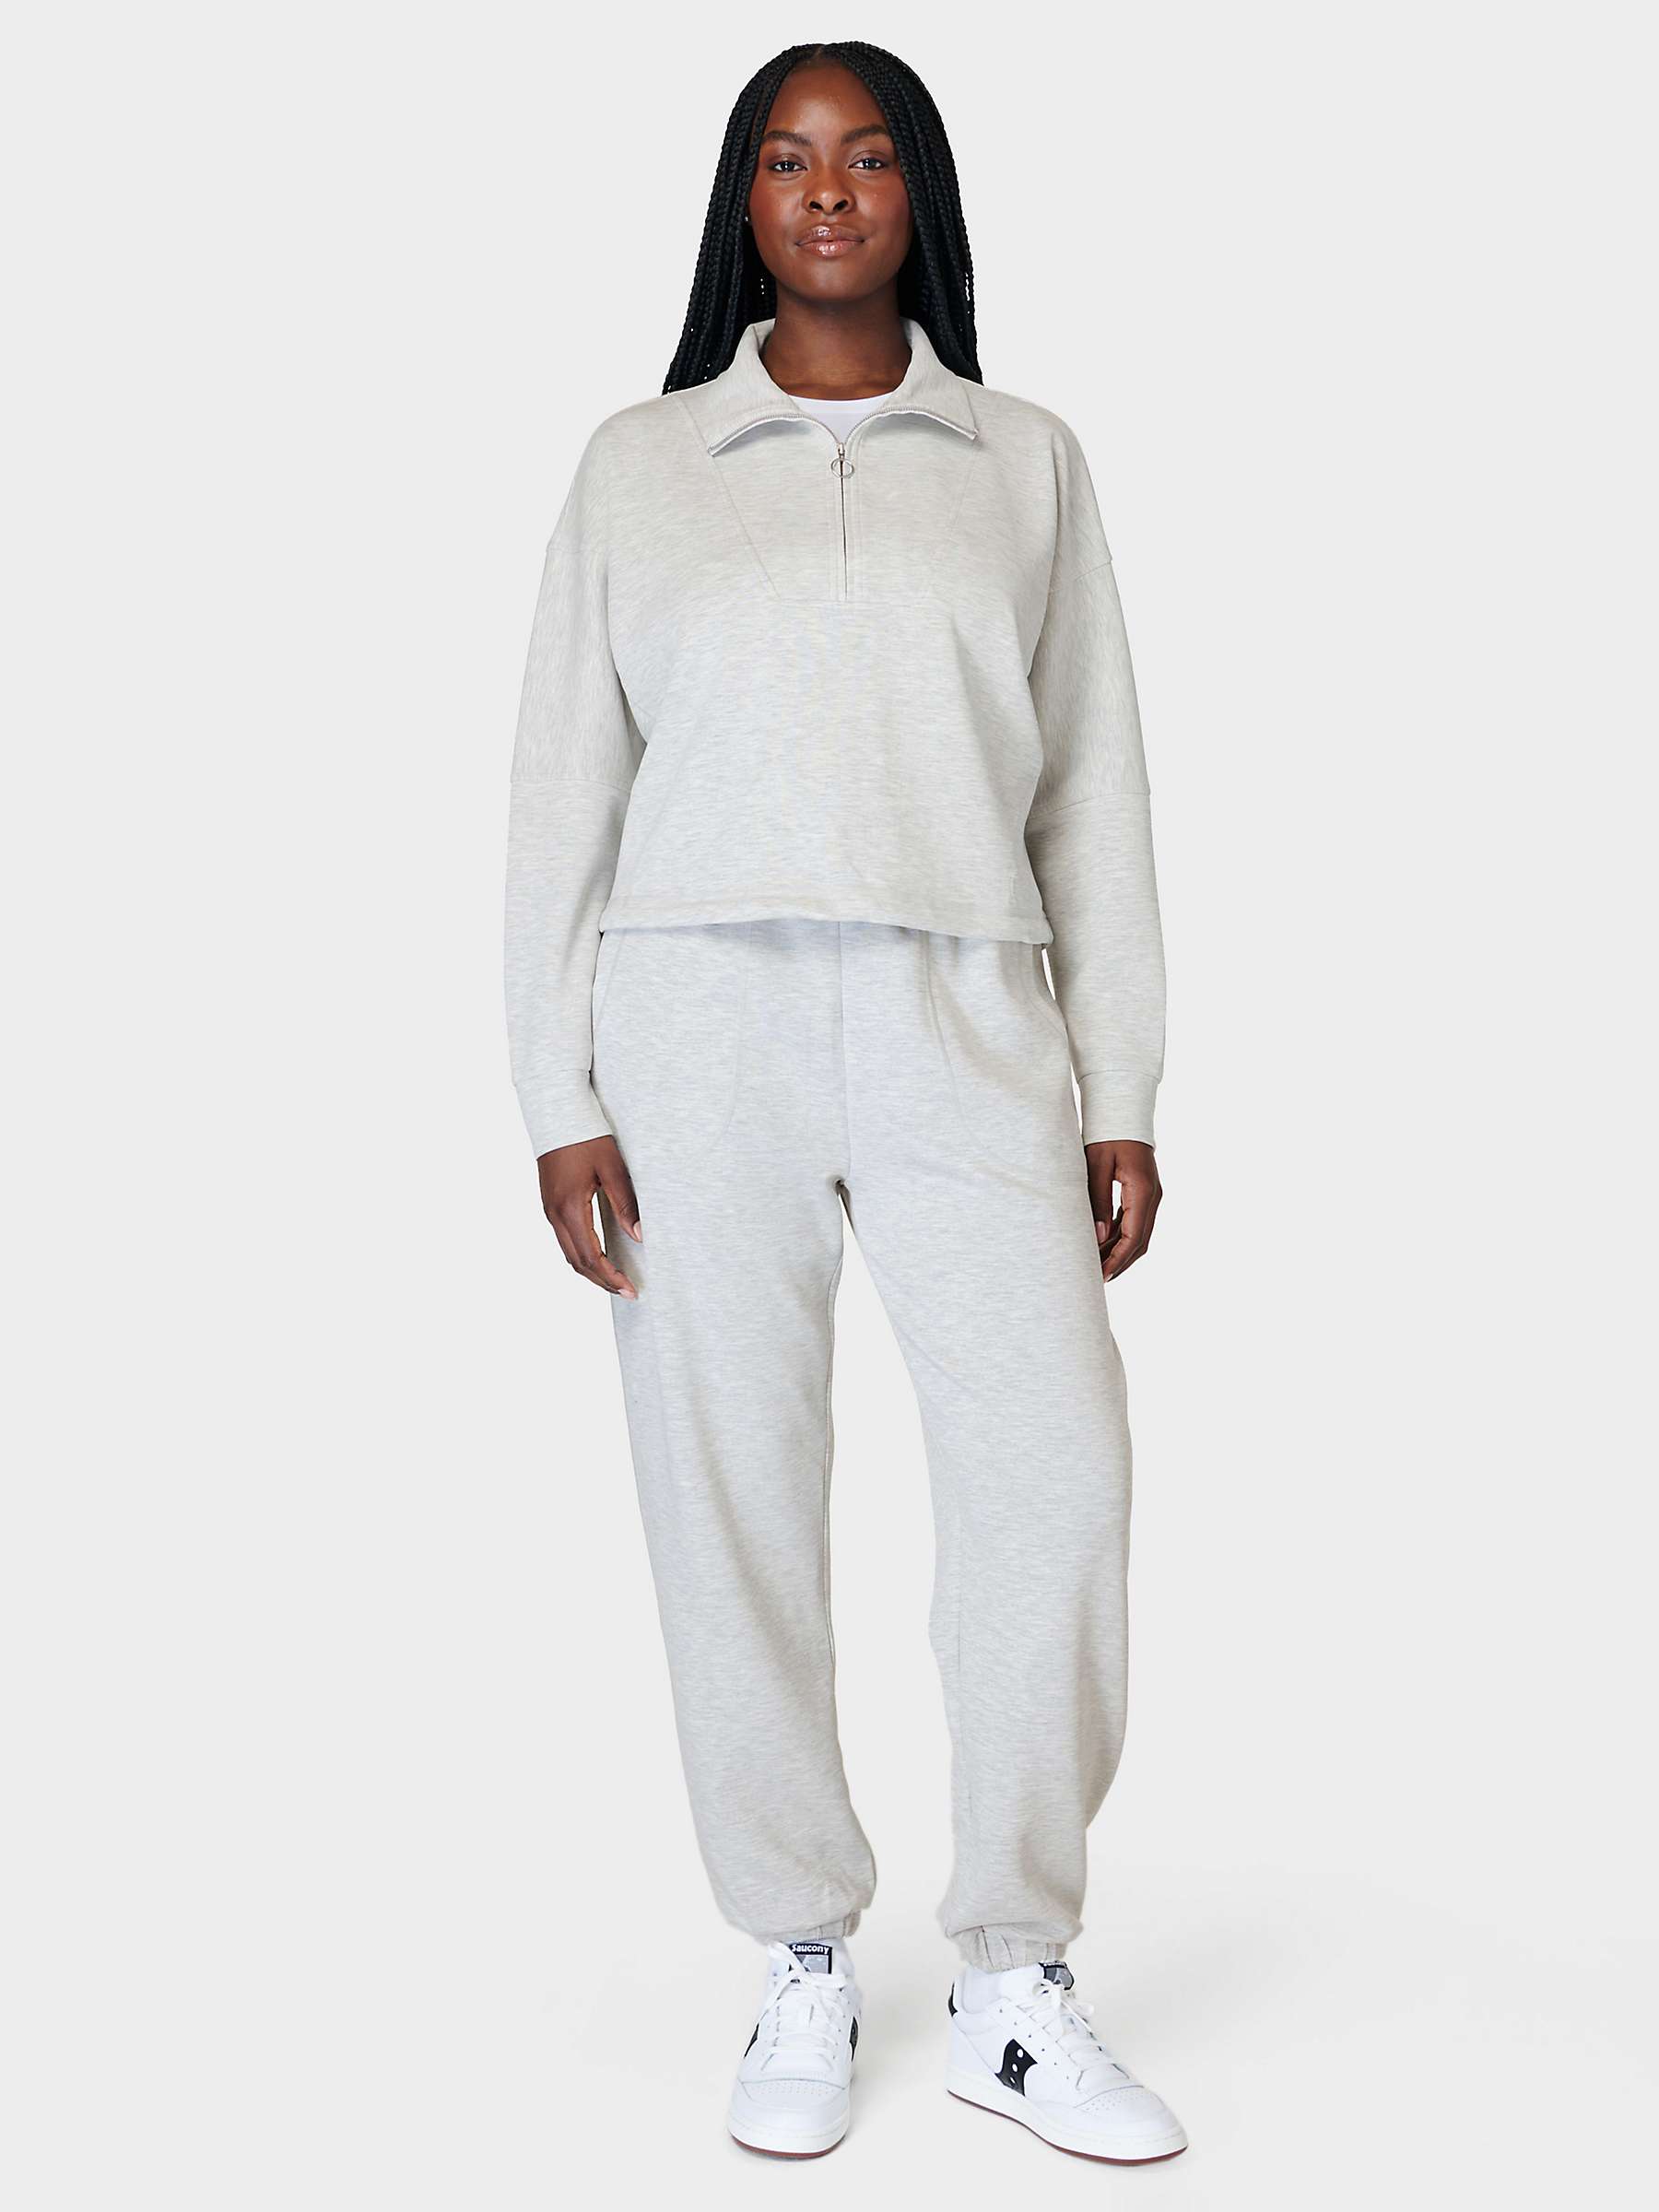 Buy Sweaty Betty Sand Wash Cuffed Joggers Online at johnlewis.com